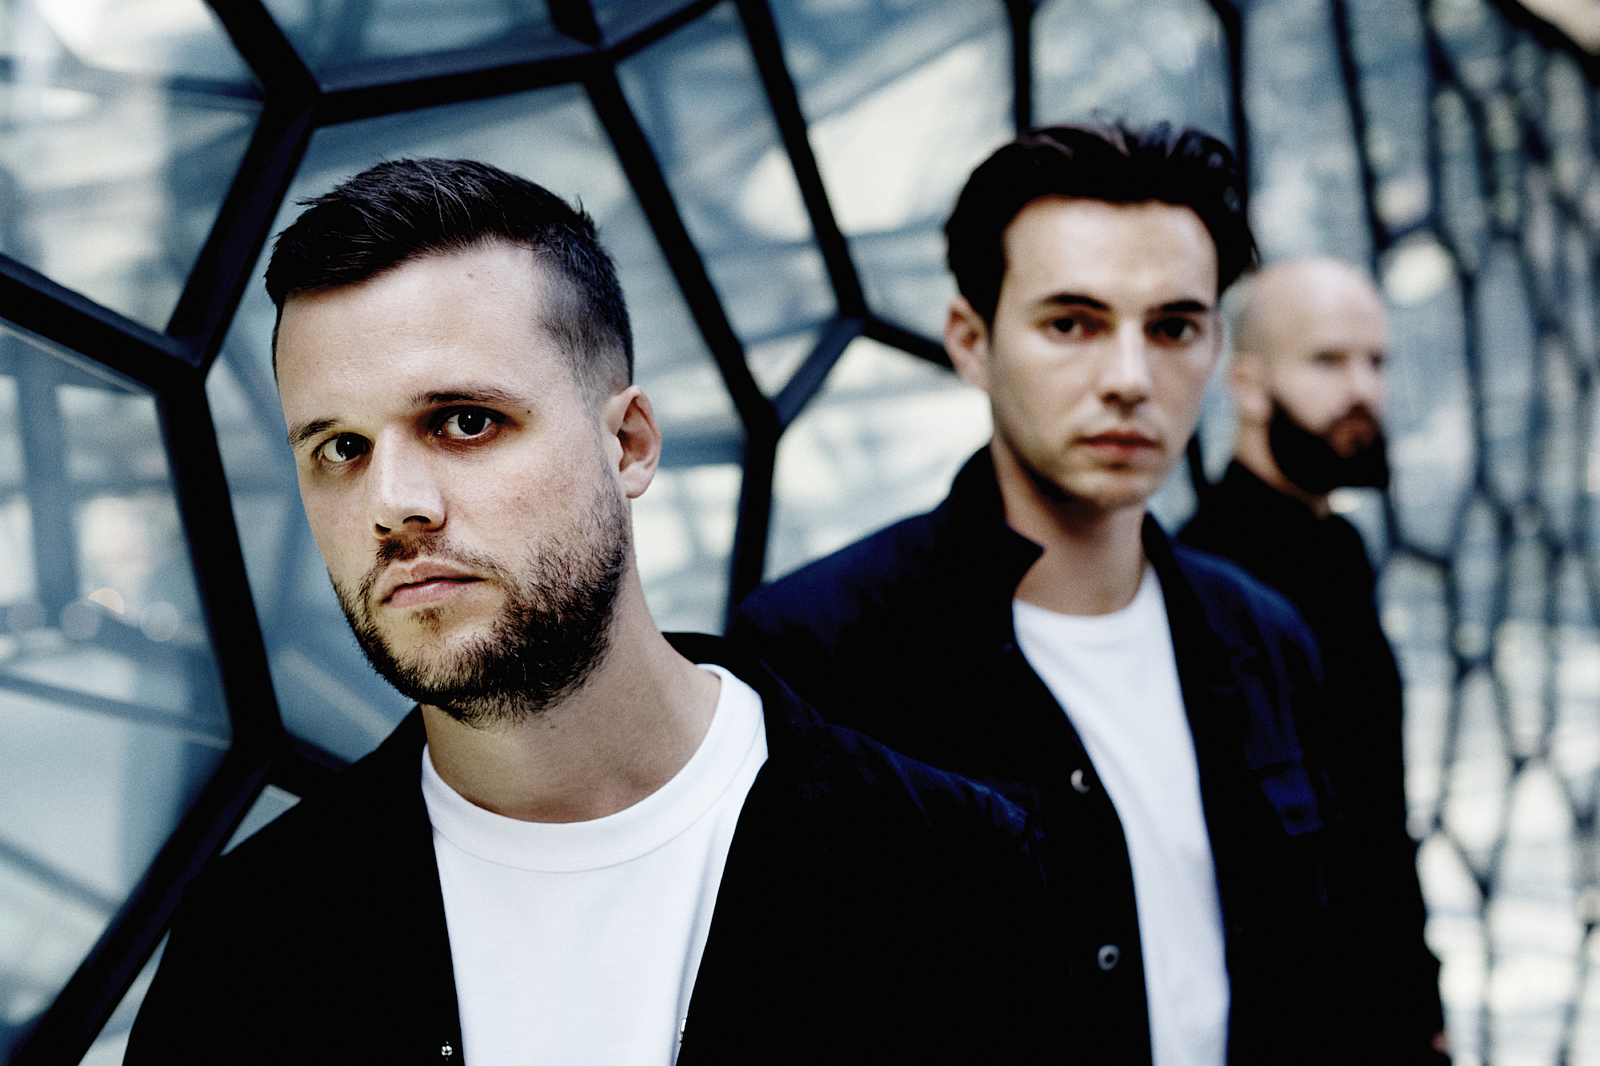 White Lies to headline Stand Up To Cancer at Union Chapel